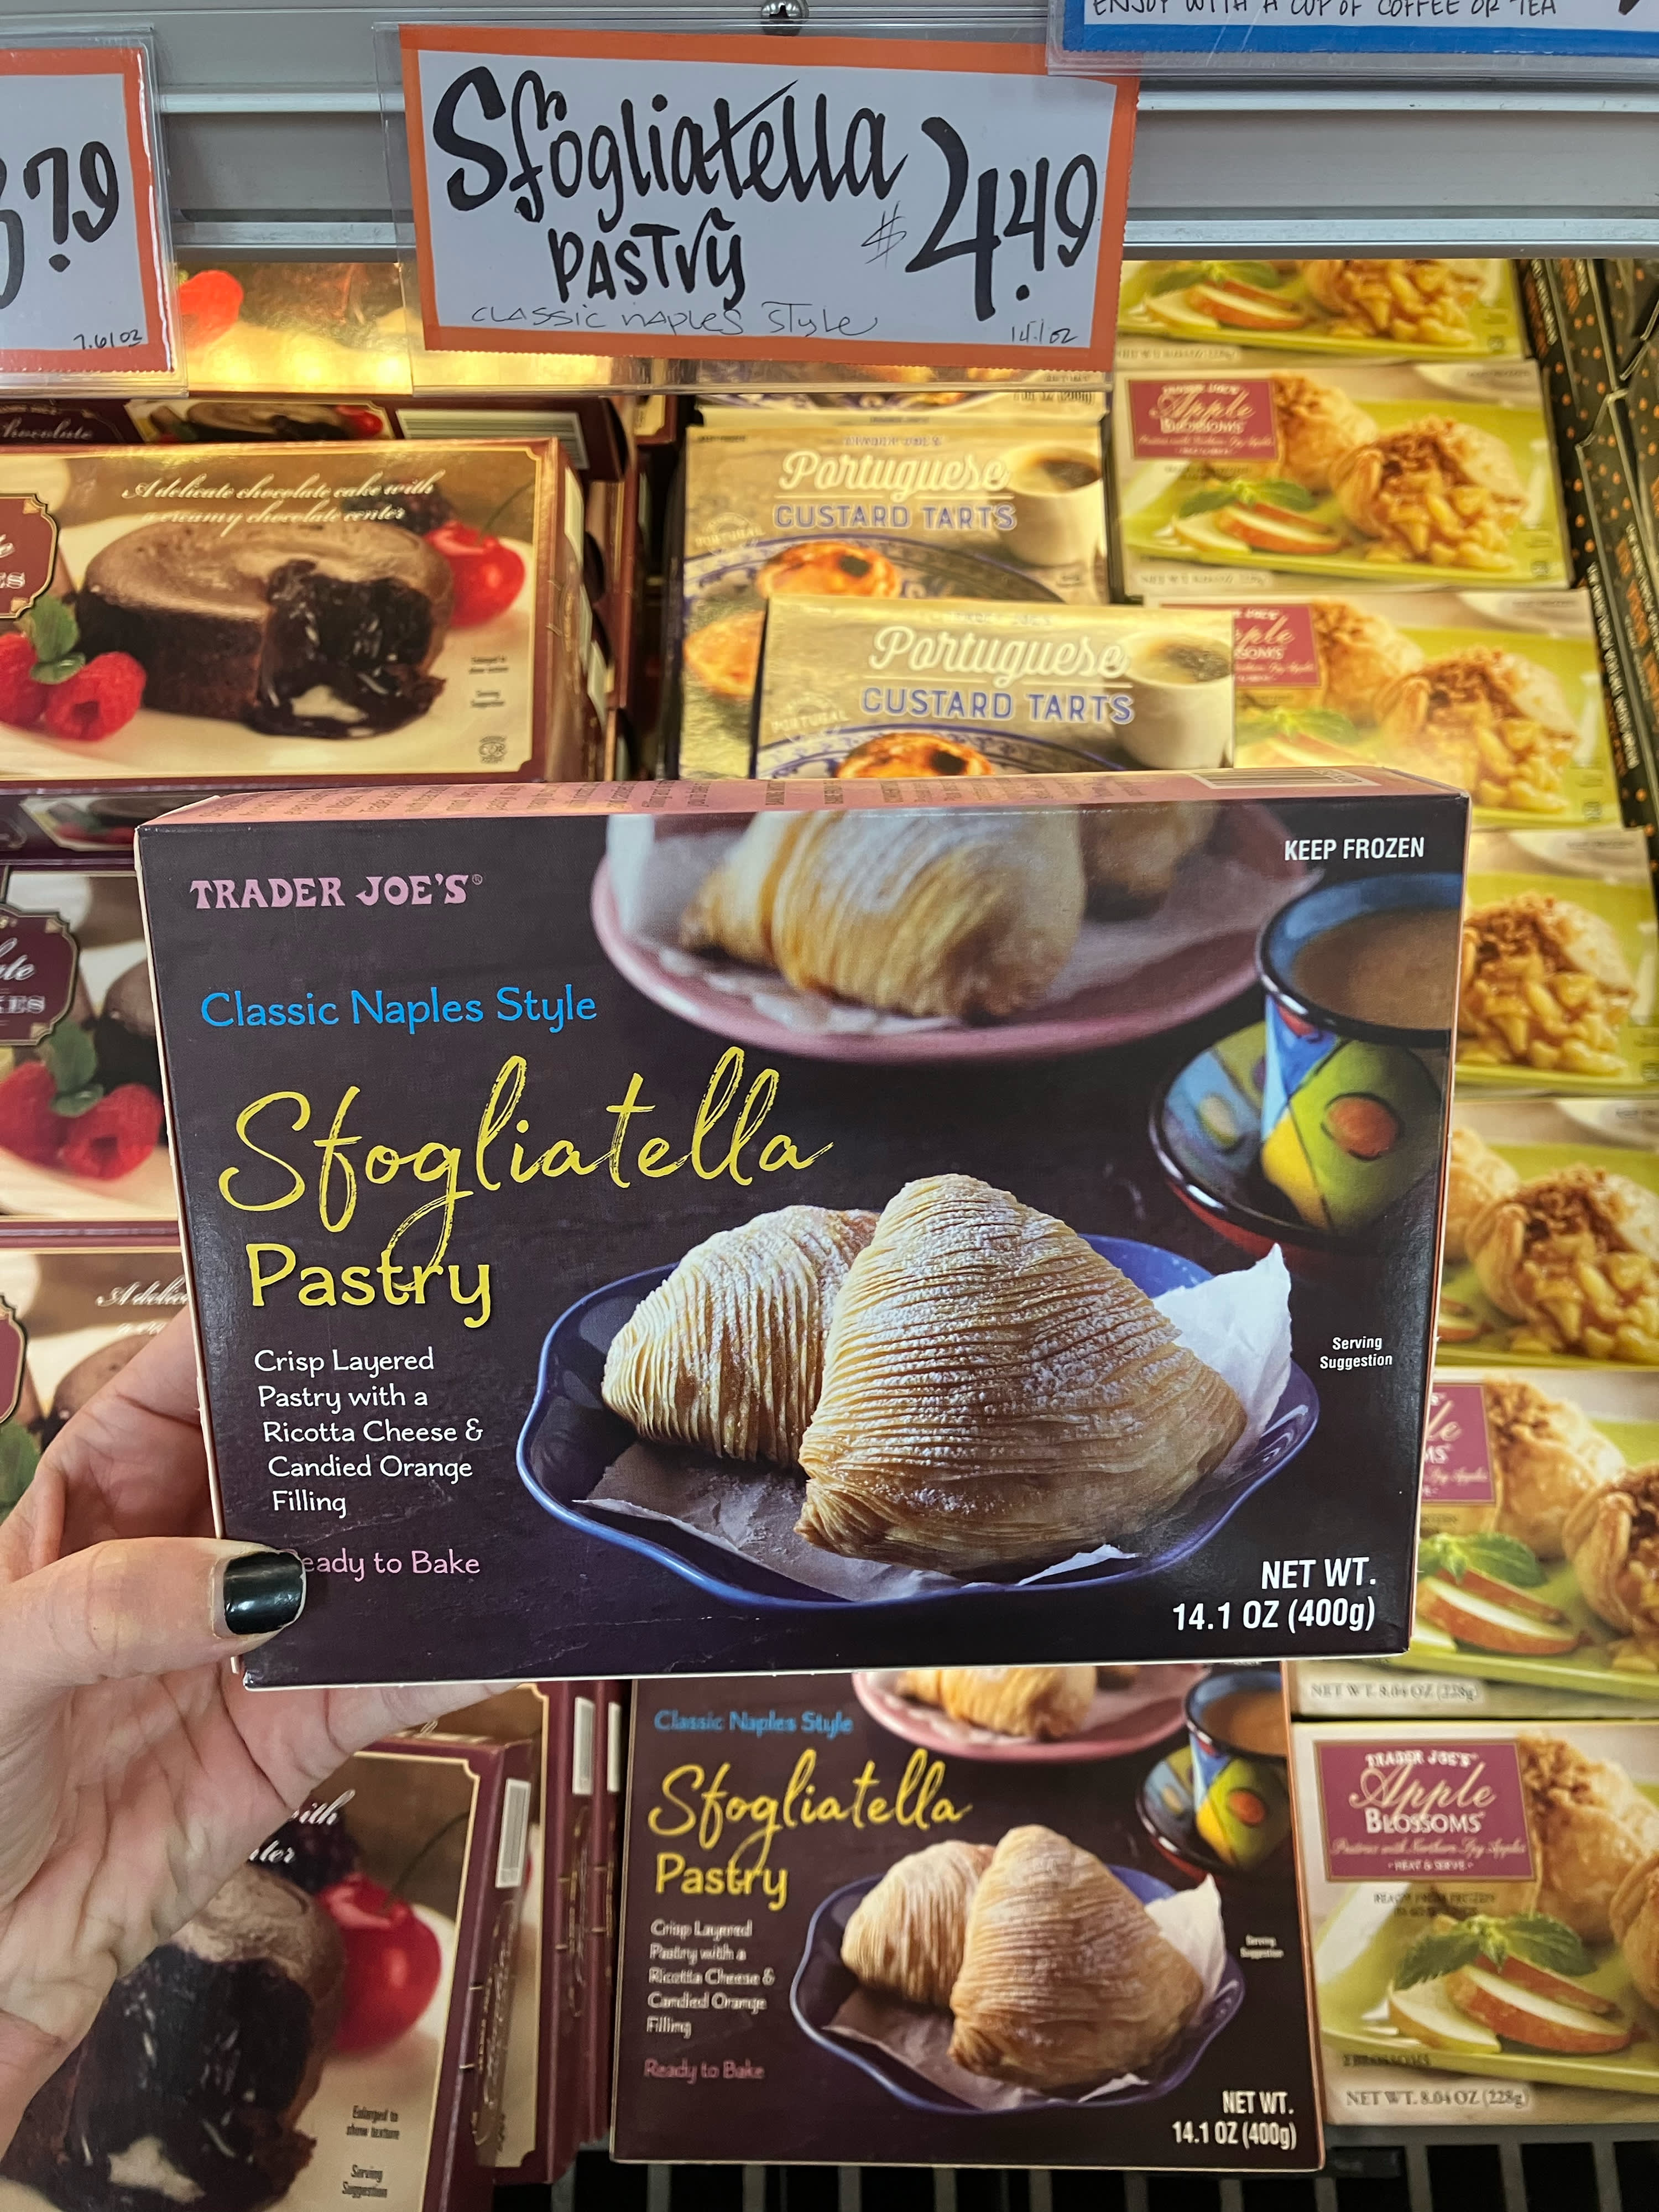 https://cdn.apartmenttherapy.info/image/upload/v1683145326/k/Edit/2023-05-may-best-new-trader-joes-groceries/may-best-new-trader-joes-groceries-sfogliatella.jpg